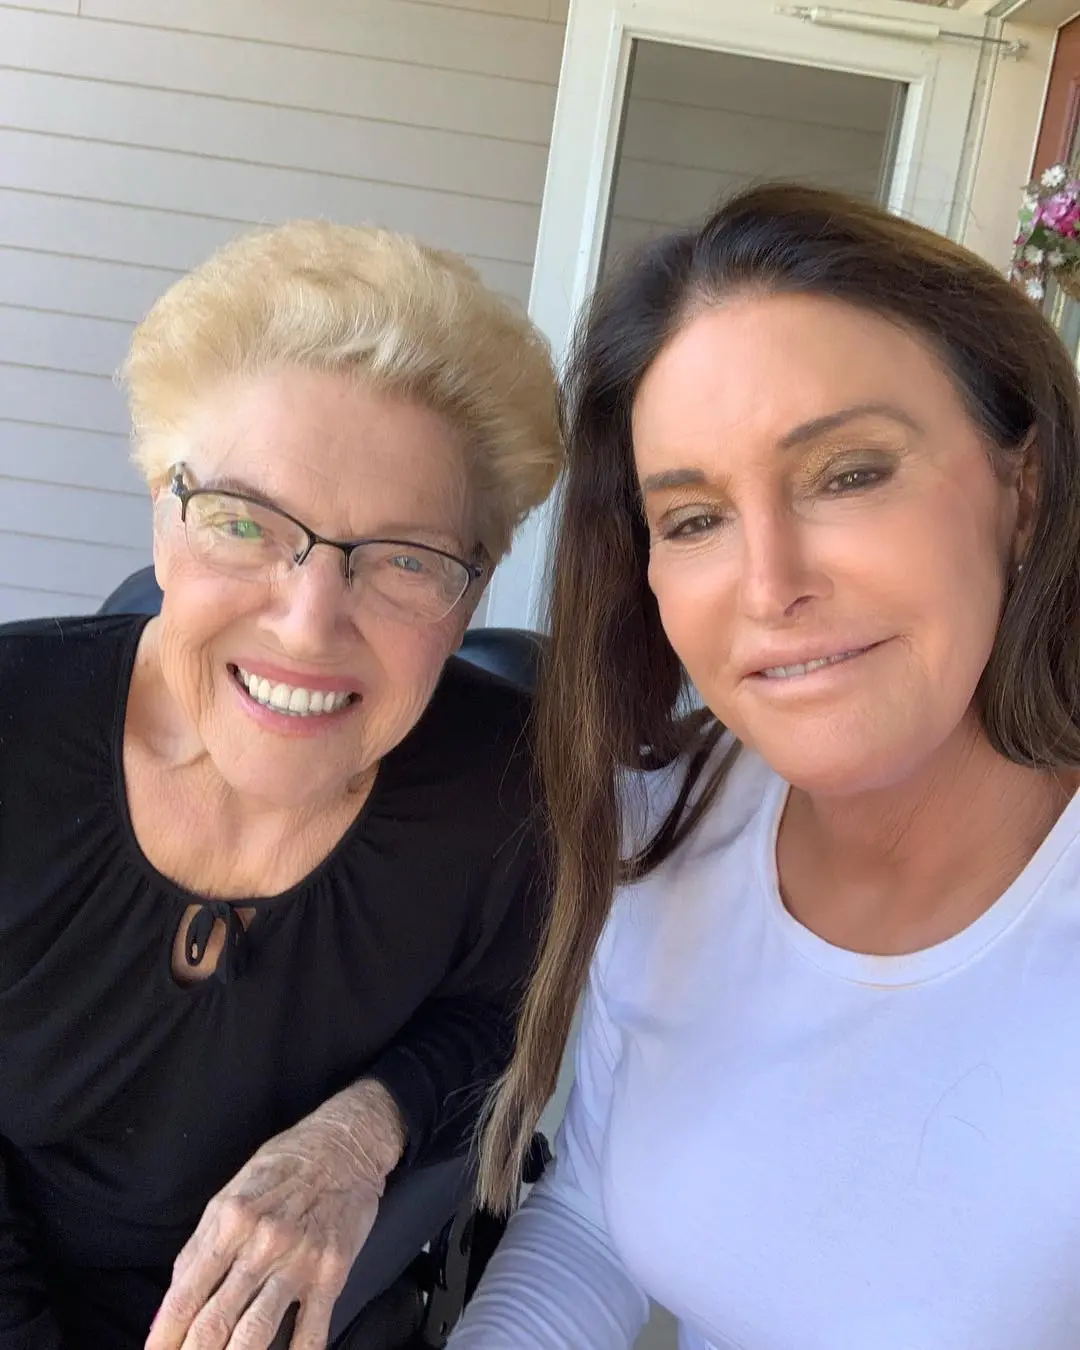 Caitlyn Jenner Mourns the Death of Her Mother Esther Jenner as She Dies at 96